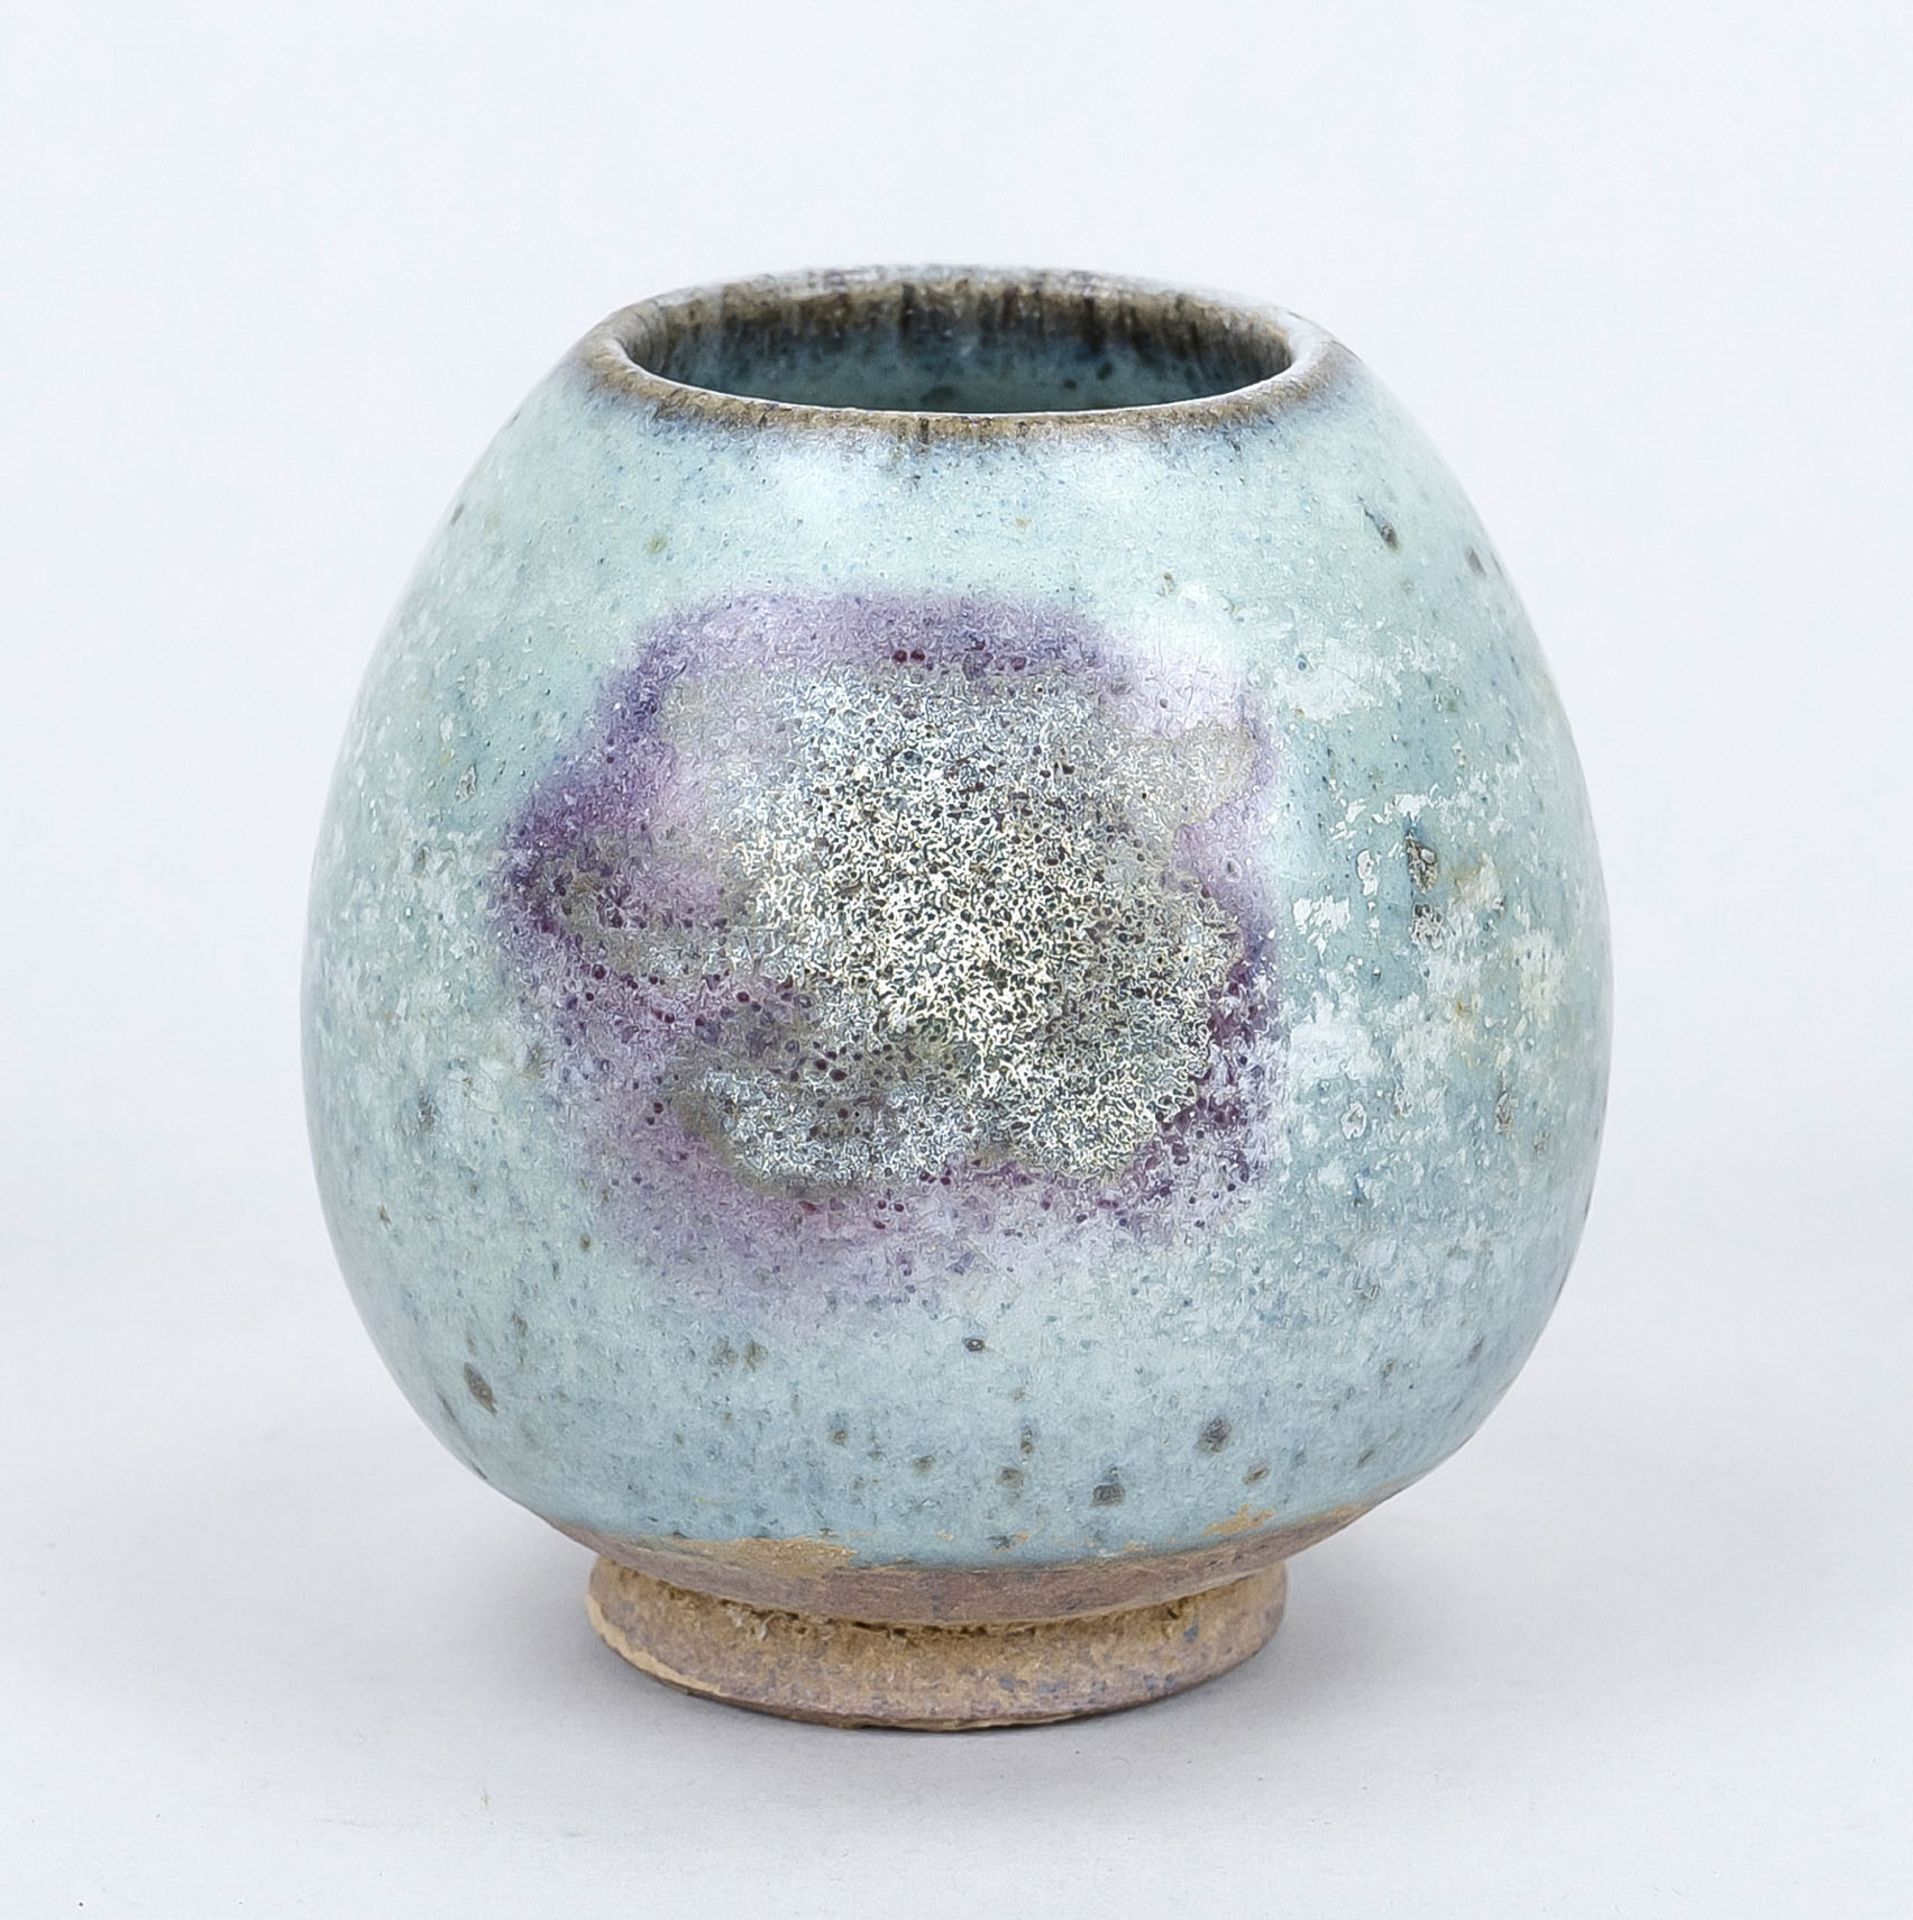 Ovoid Jun ware cup, China, exact age uncertain. Light blue to gray glaze with a purple splash,